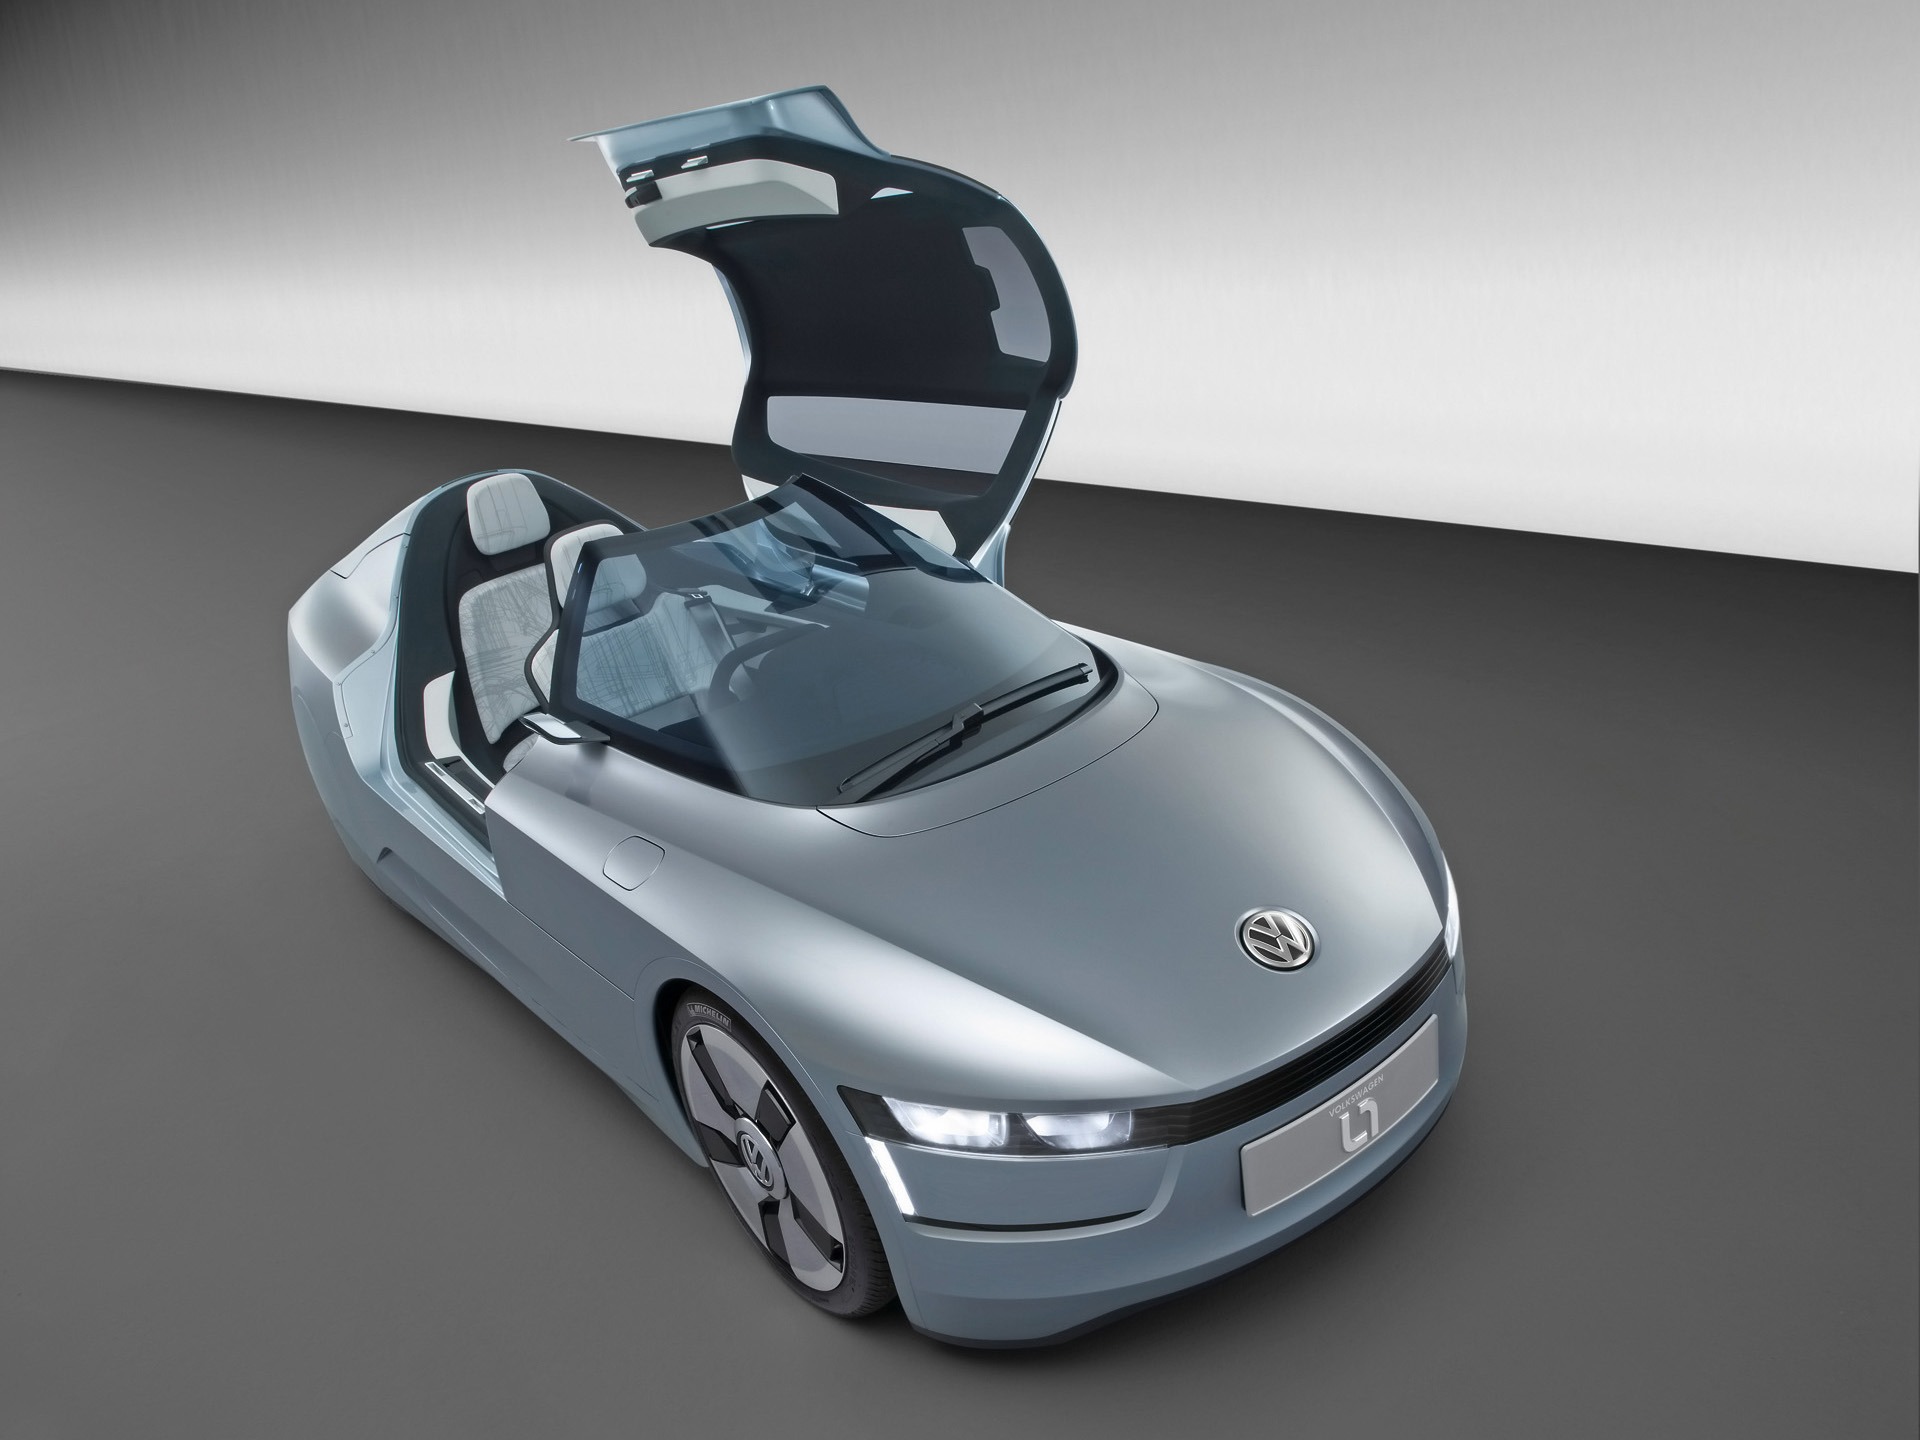 Volkswagen L1 Tapety Concept Car #22 - 1920x1440